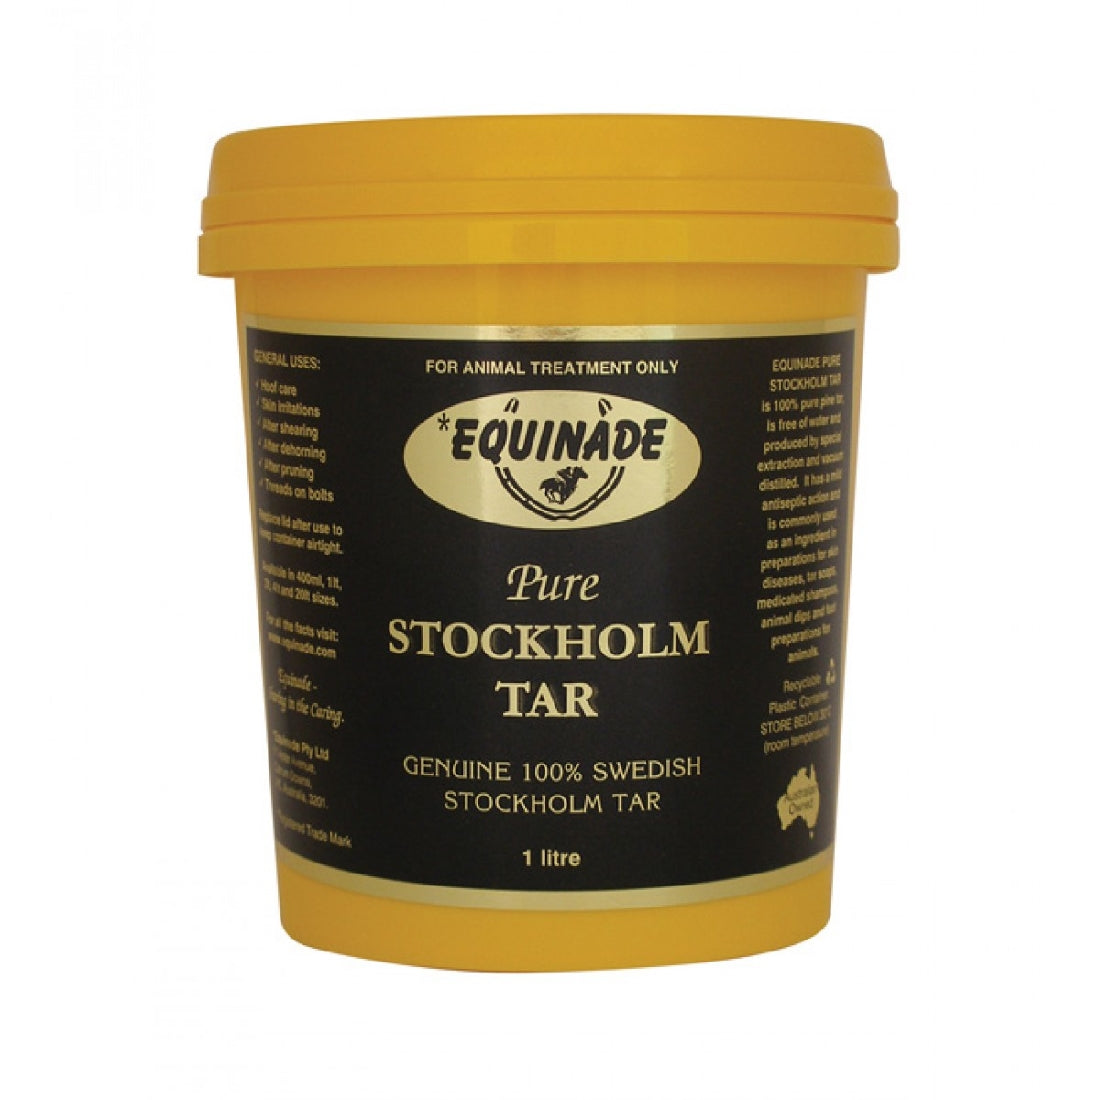 A 1-litre yellow container of Equinade Pure Stockholm Tar, specified for animal treatment only, labeled as genuine 100% Swedish Stockholm tar.